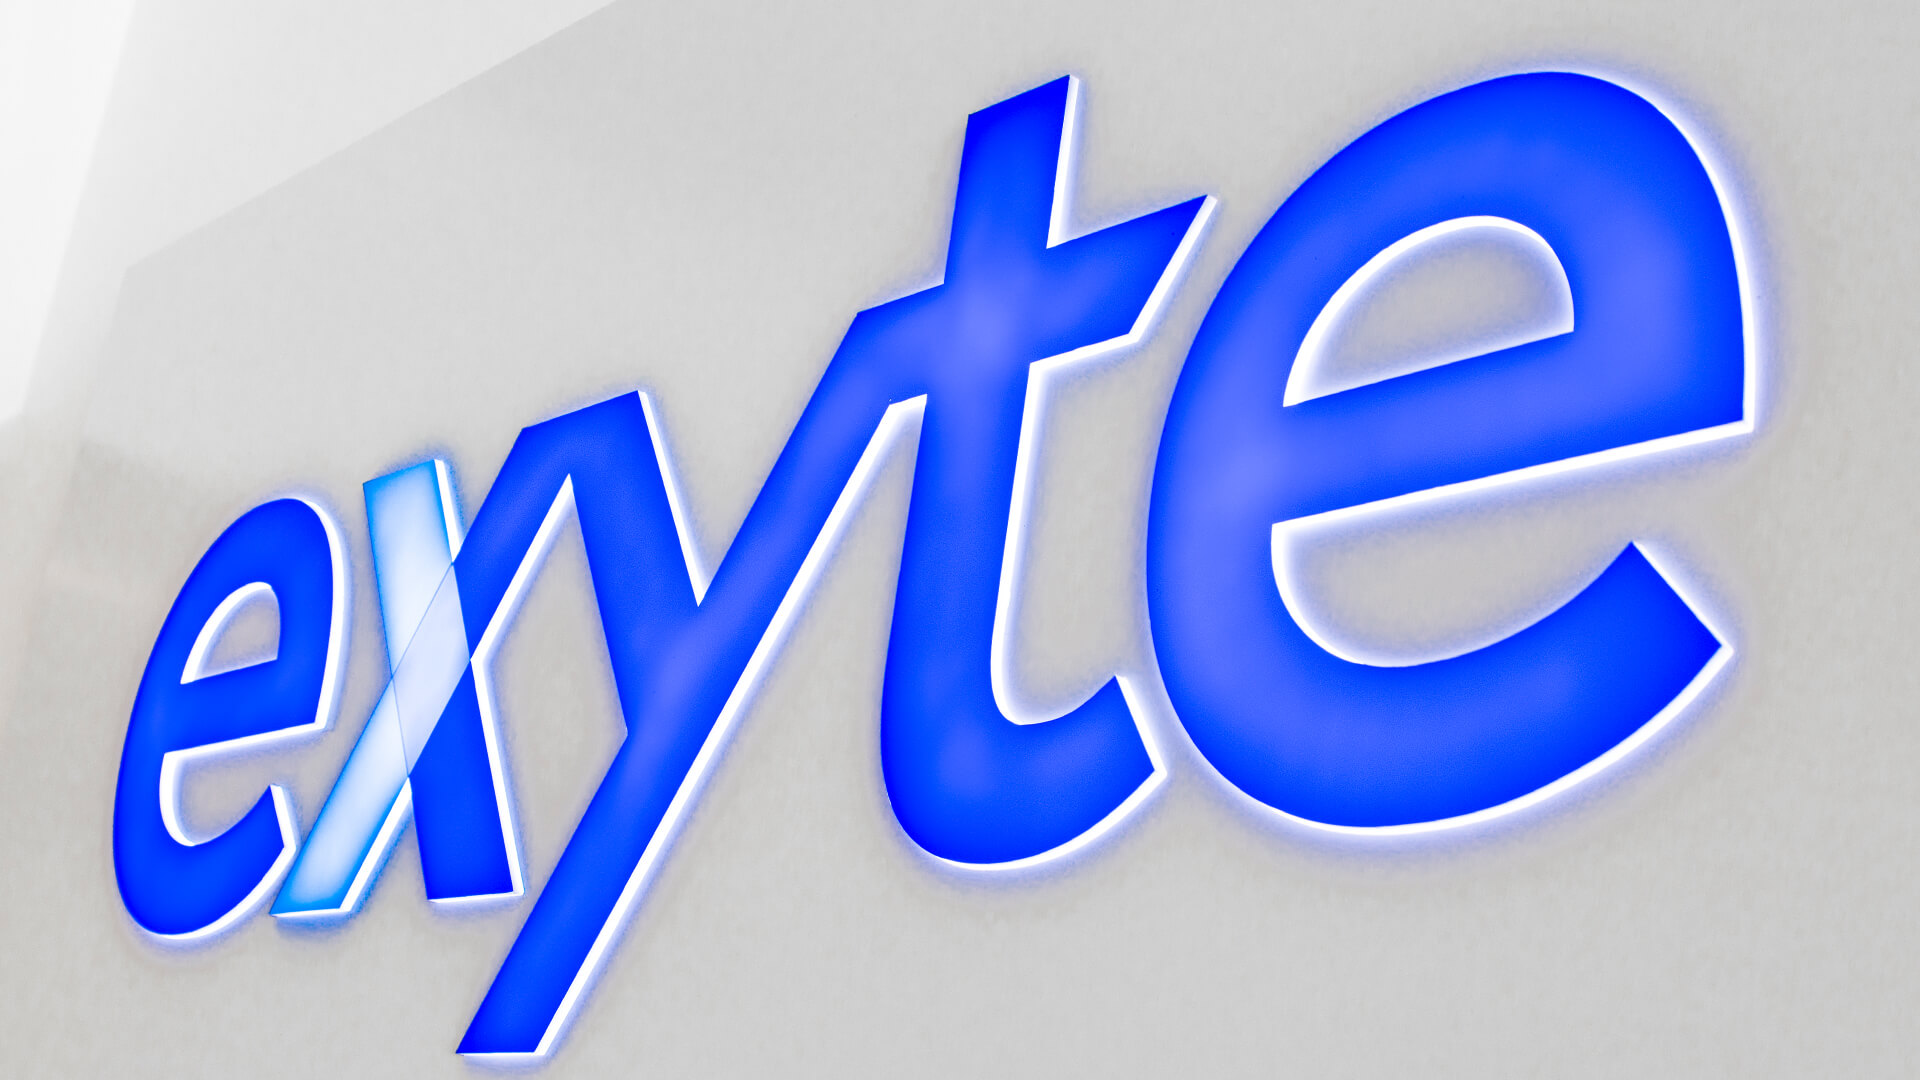 exyte exit exite - exyte-casette-sign-on-wall-interior-office-behind-reception-blue-logo-illuminated-casette-sign-on-order-gdansk-technological-scientific-park